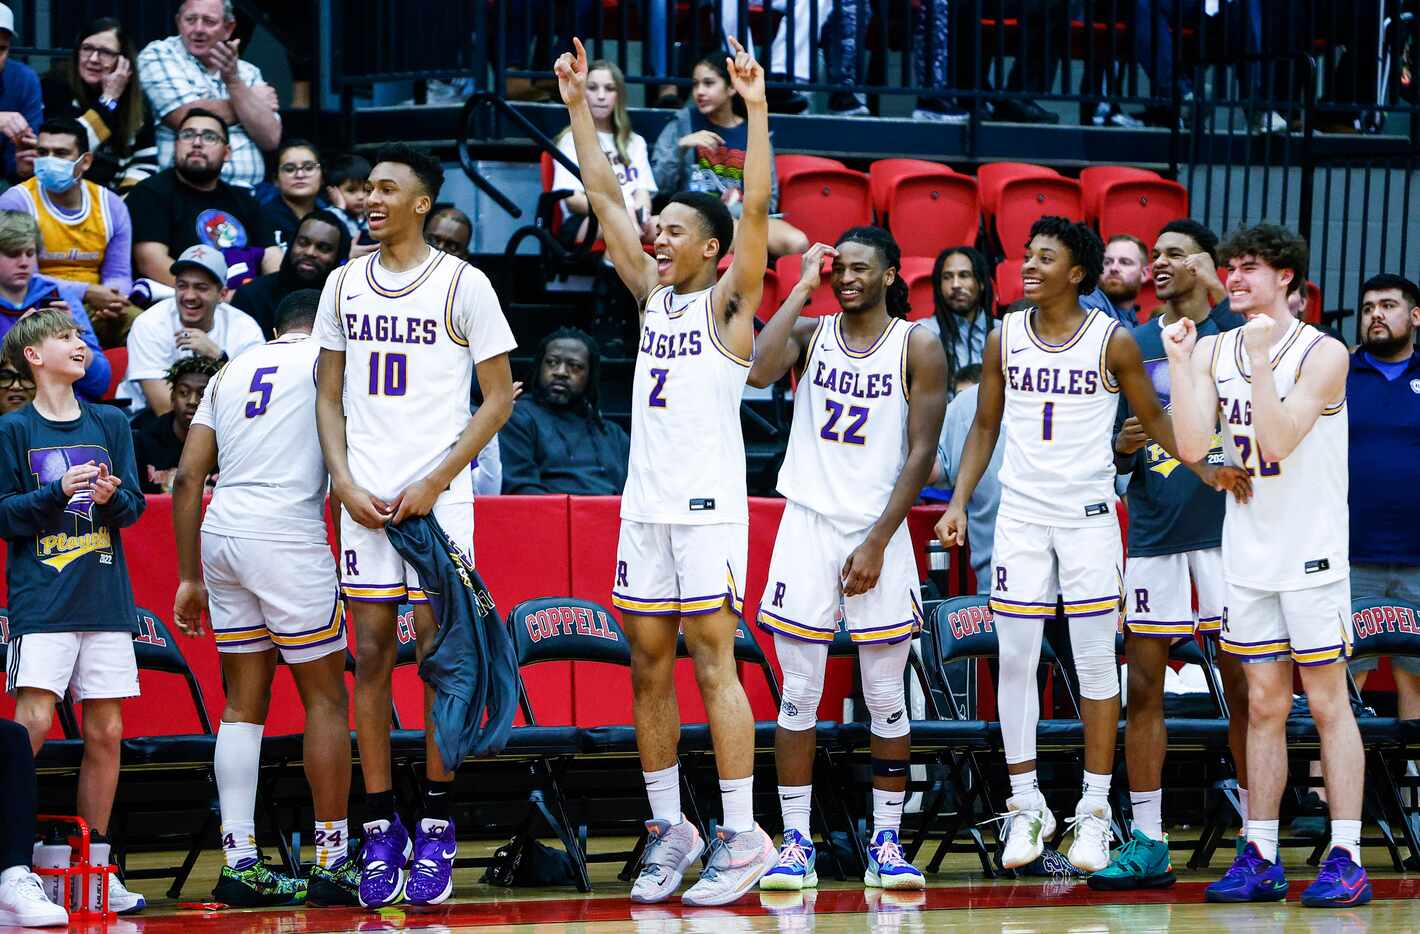 The Richardson varsity basketball team celebrate a 97-63 win over Grand Prairie after a boys...